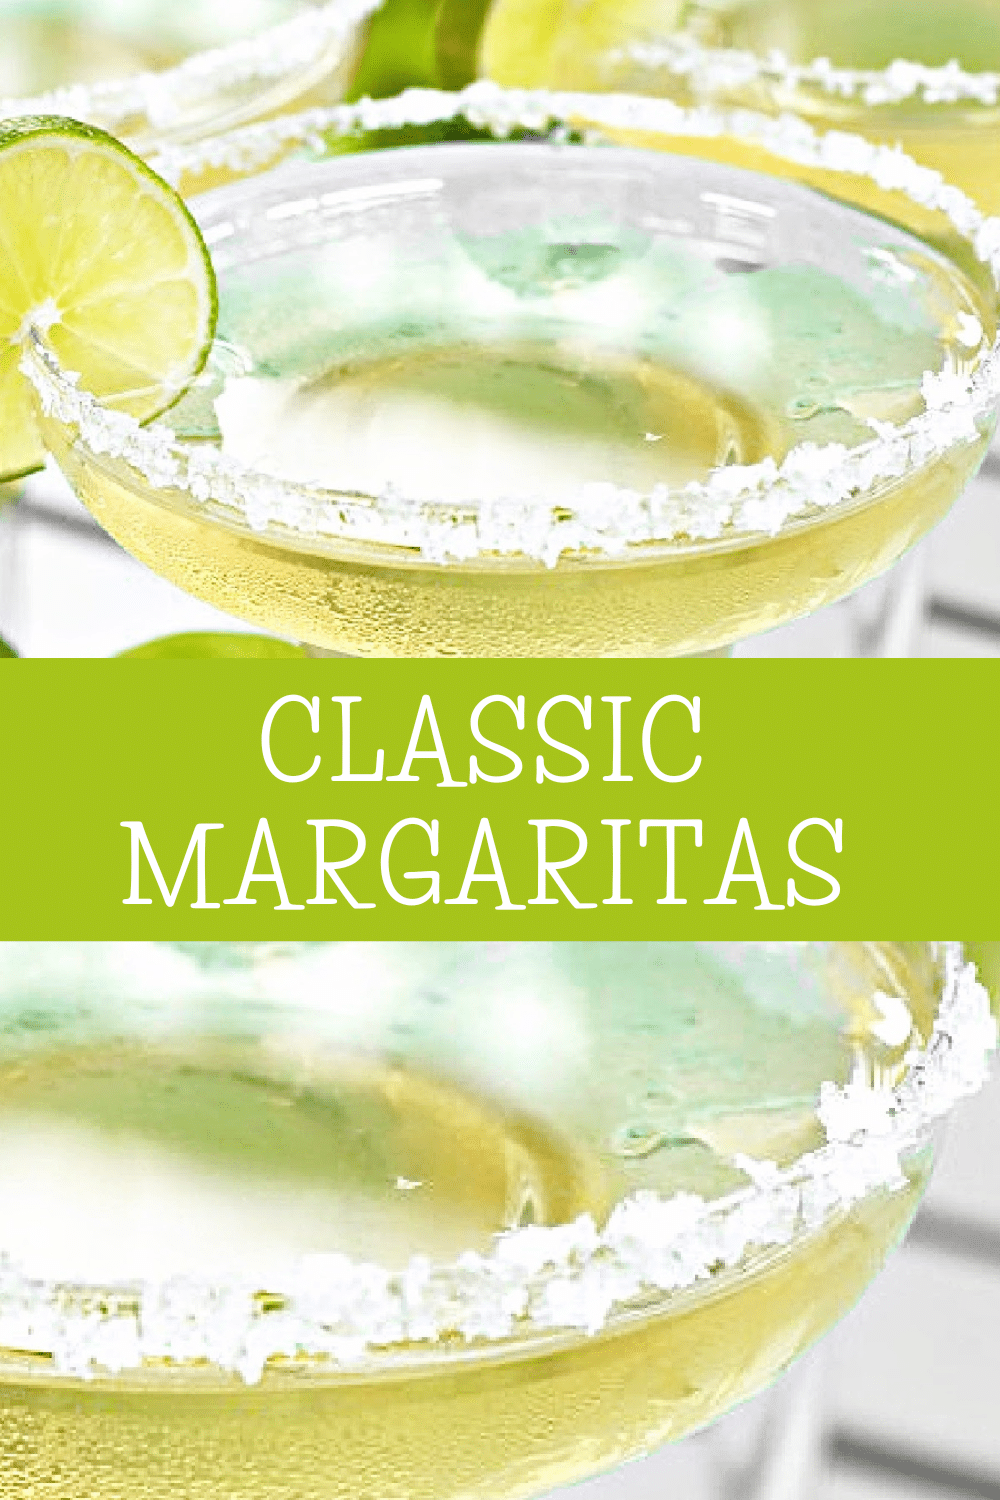 Margaritas ~ Quick and easy classic margarita cocktail made with simple ingredients. Perfect for Cinco de Mayo or a taste of summer anytime! via @thiswifecooks